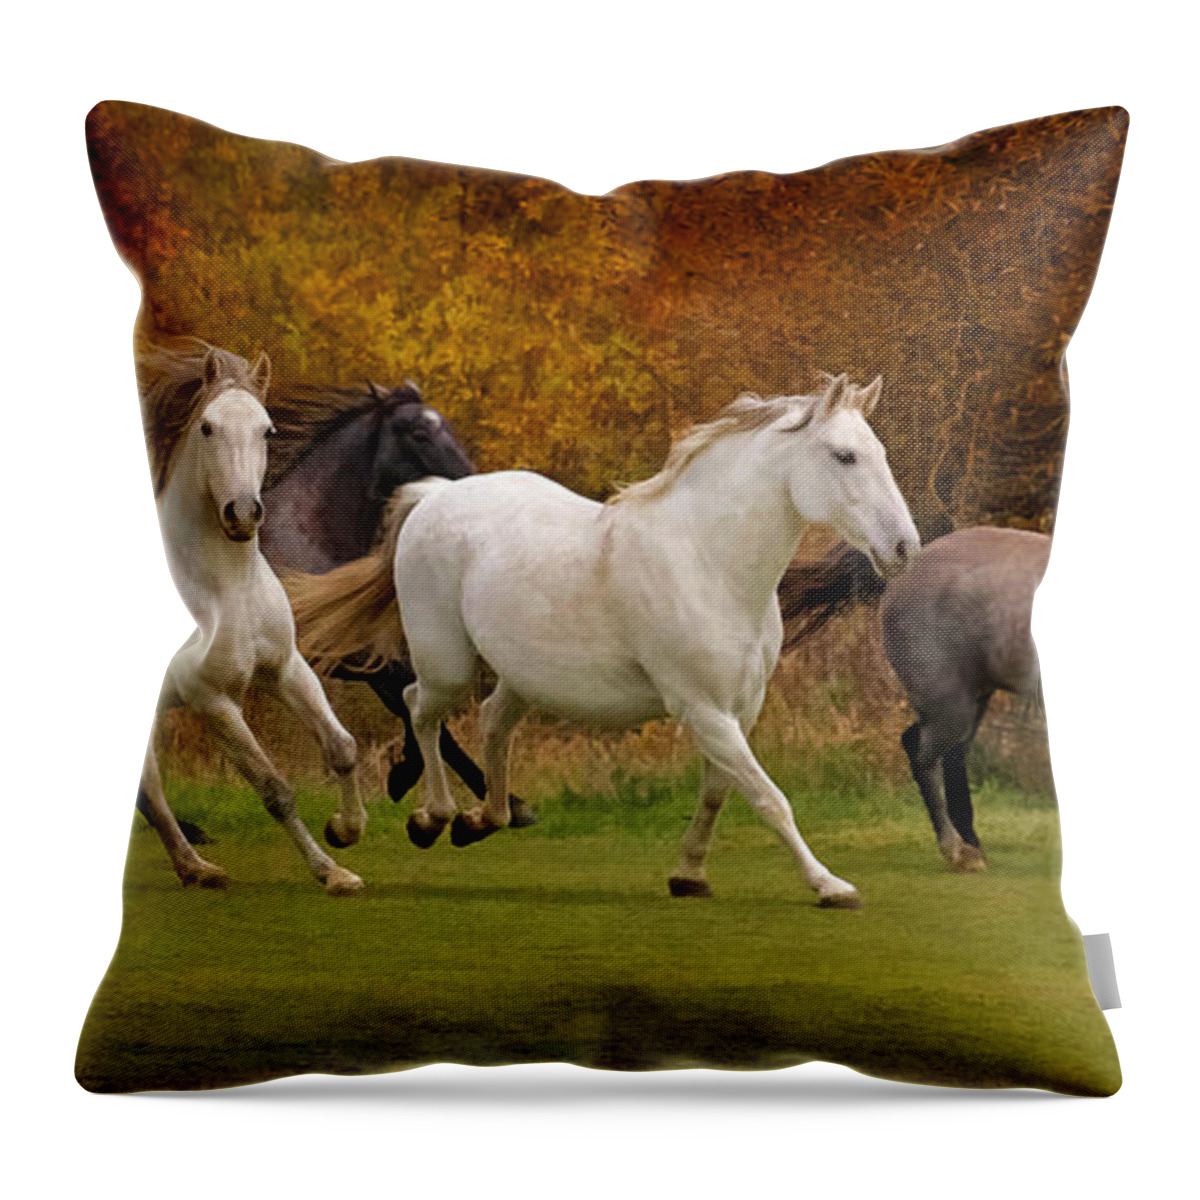 White Horse Vale Lipizzans Throw Pillow featuring the photograph White Horse Vale Lipizzans by Wes and Dotty Weber